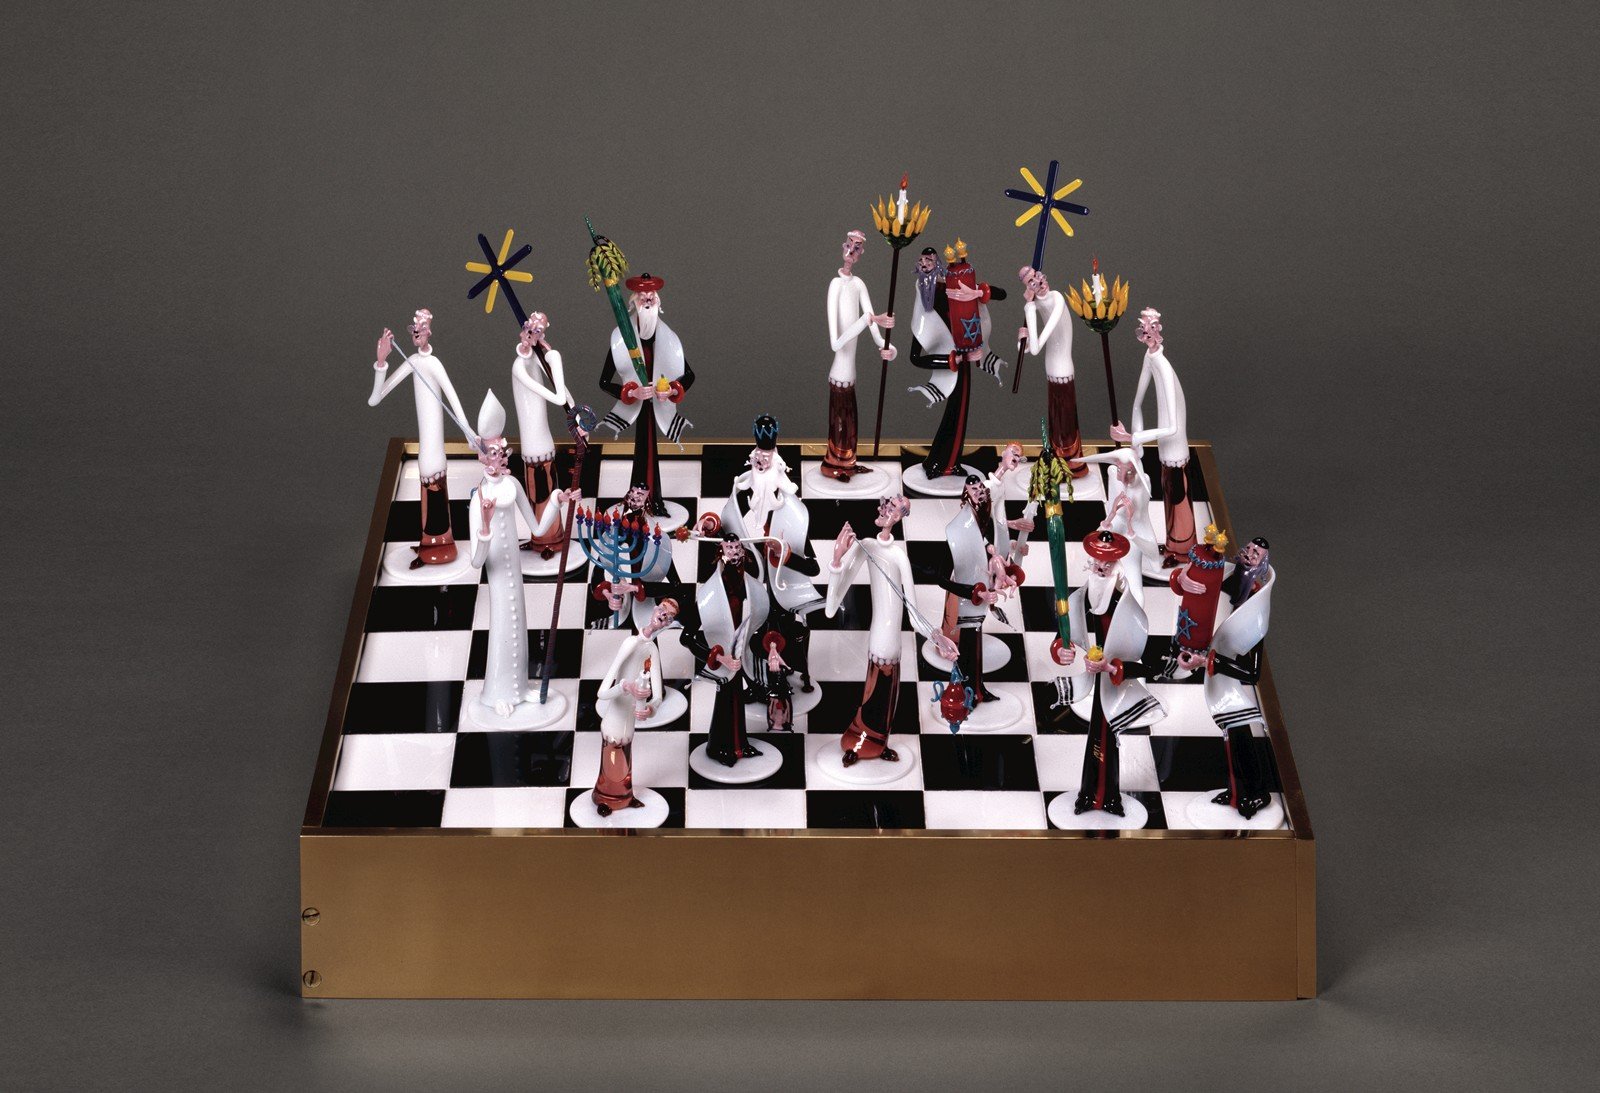 Chess sets for the rich and famous